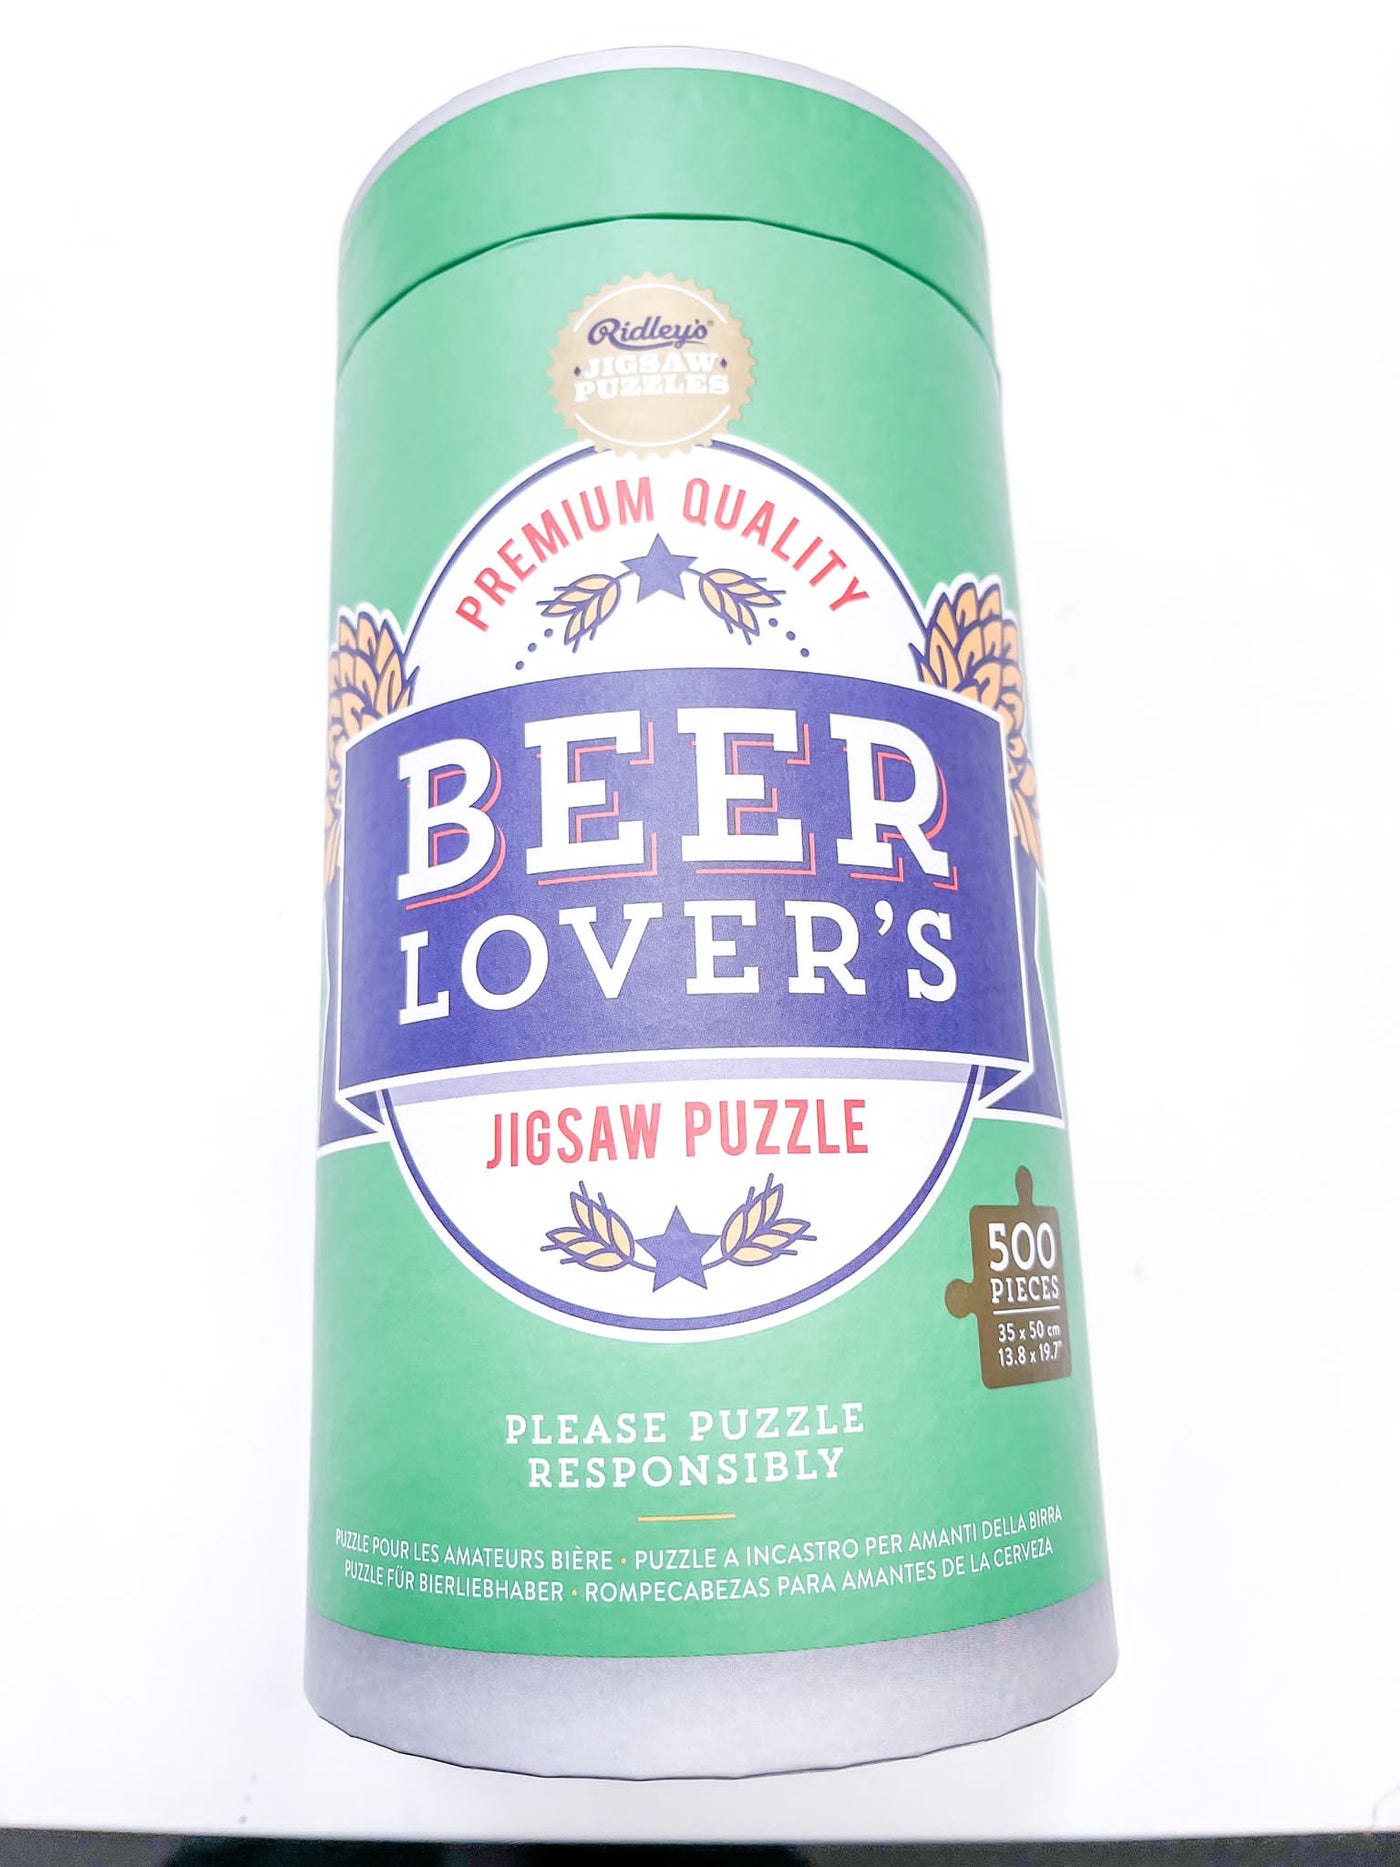 Beer Lover's Jigsaw Puzzle - Feel Better Box